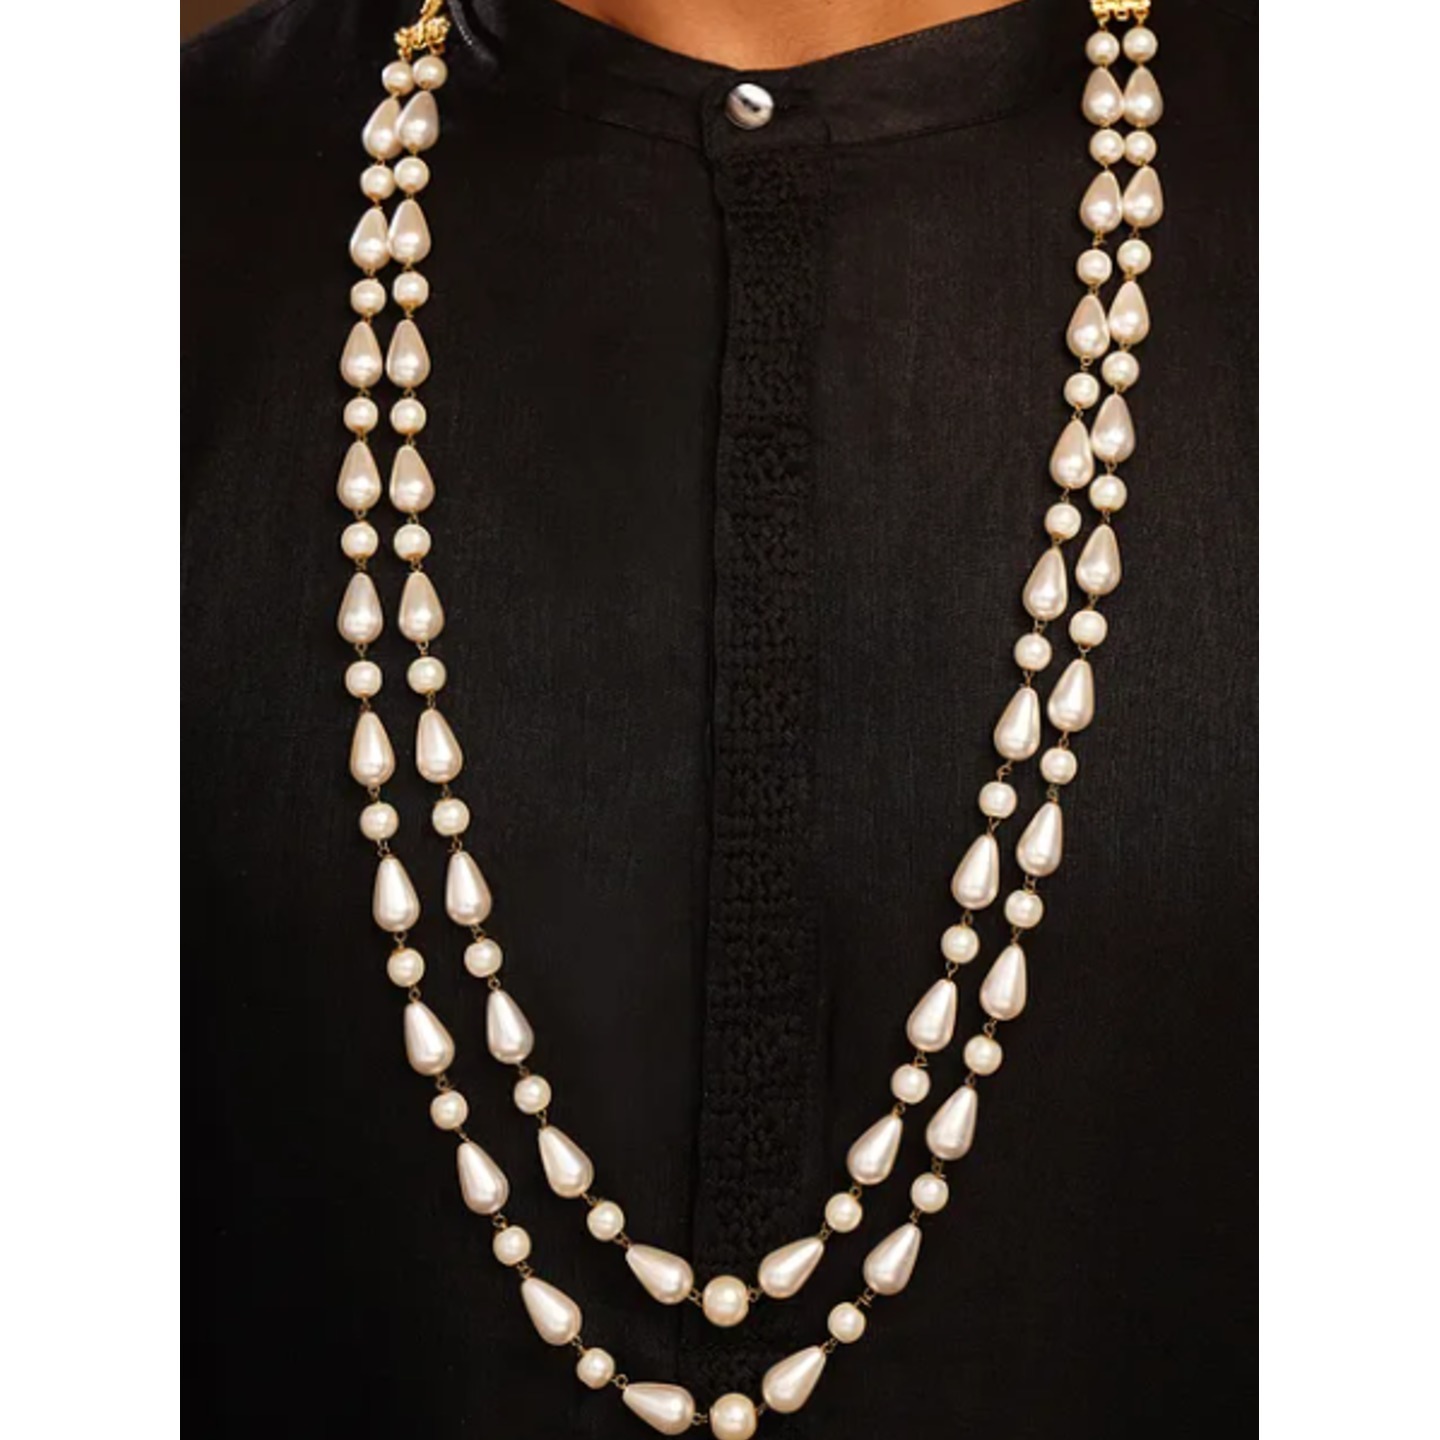 White Beaded Double Layer Necklace With Pearls For Men